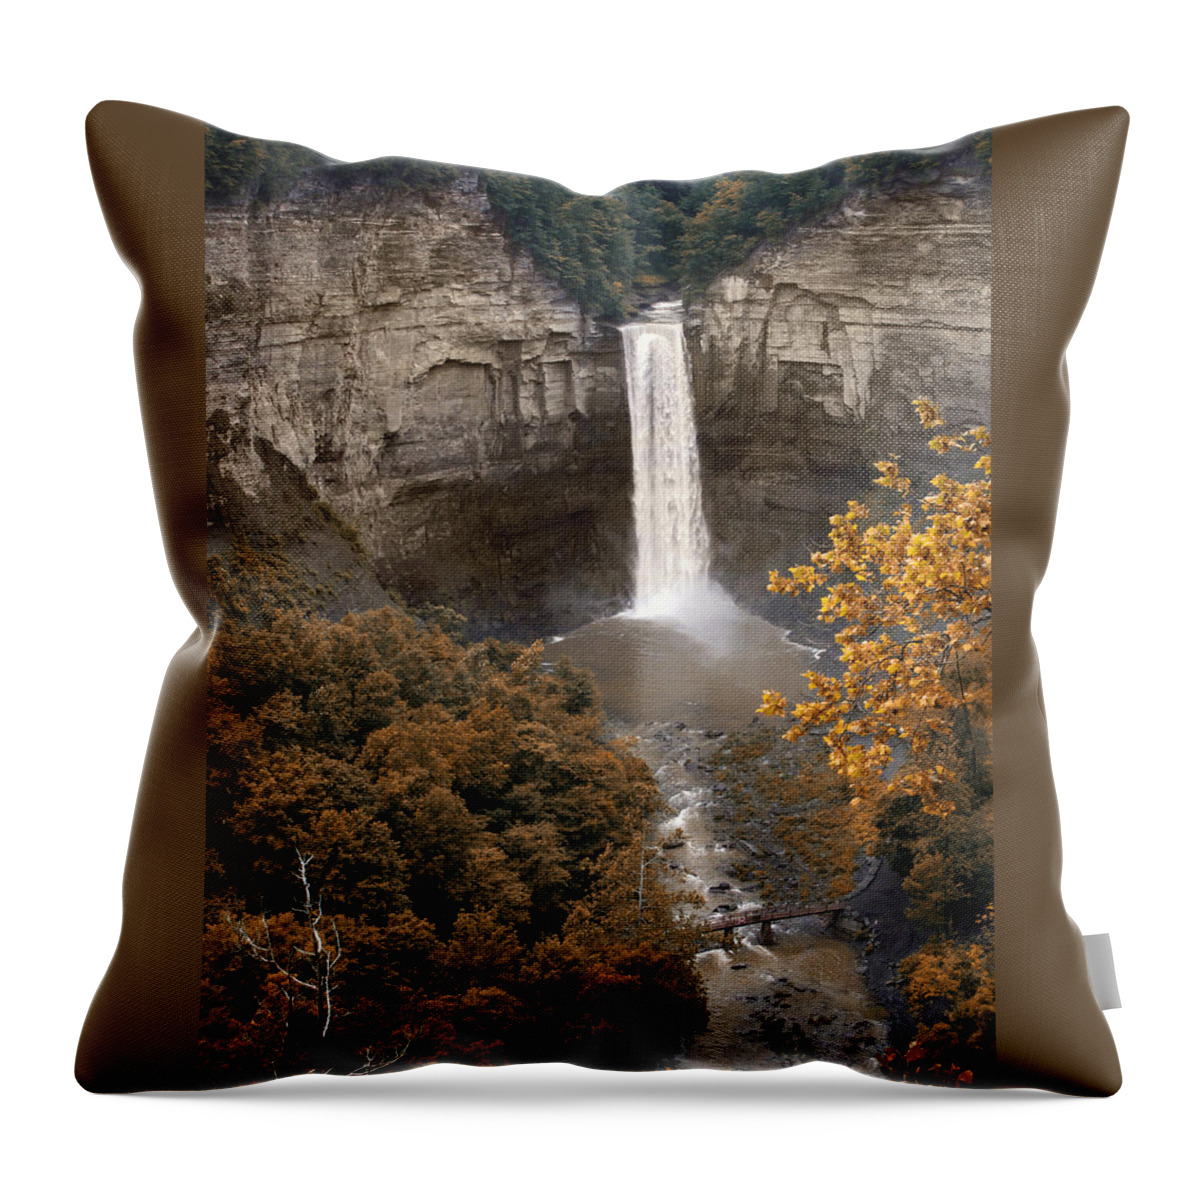 Landscape Throw Pillow featuring the photograph Taughannock Falls Park by Jessica Jenney